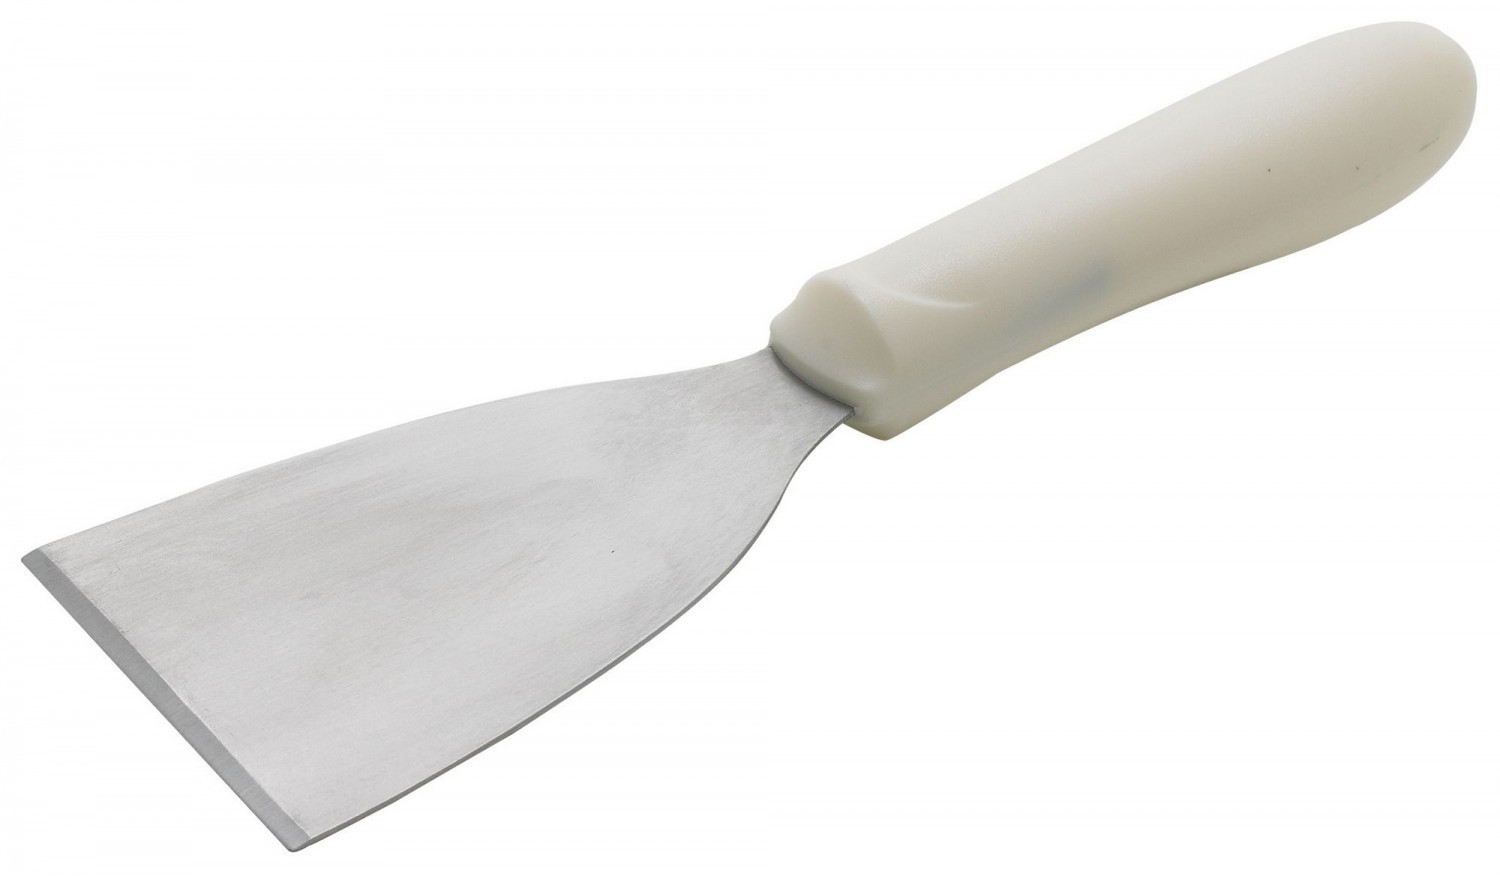 Winco TWP-32 Stainless Steel Scraper with White Handle 3" x 4" Blade